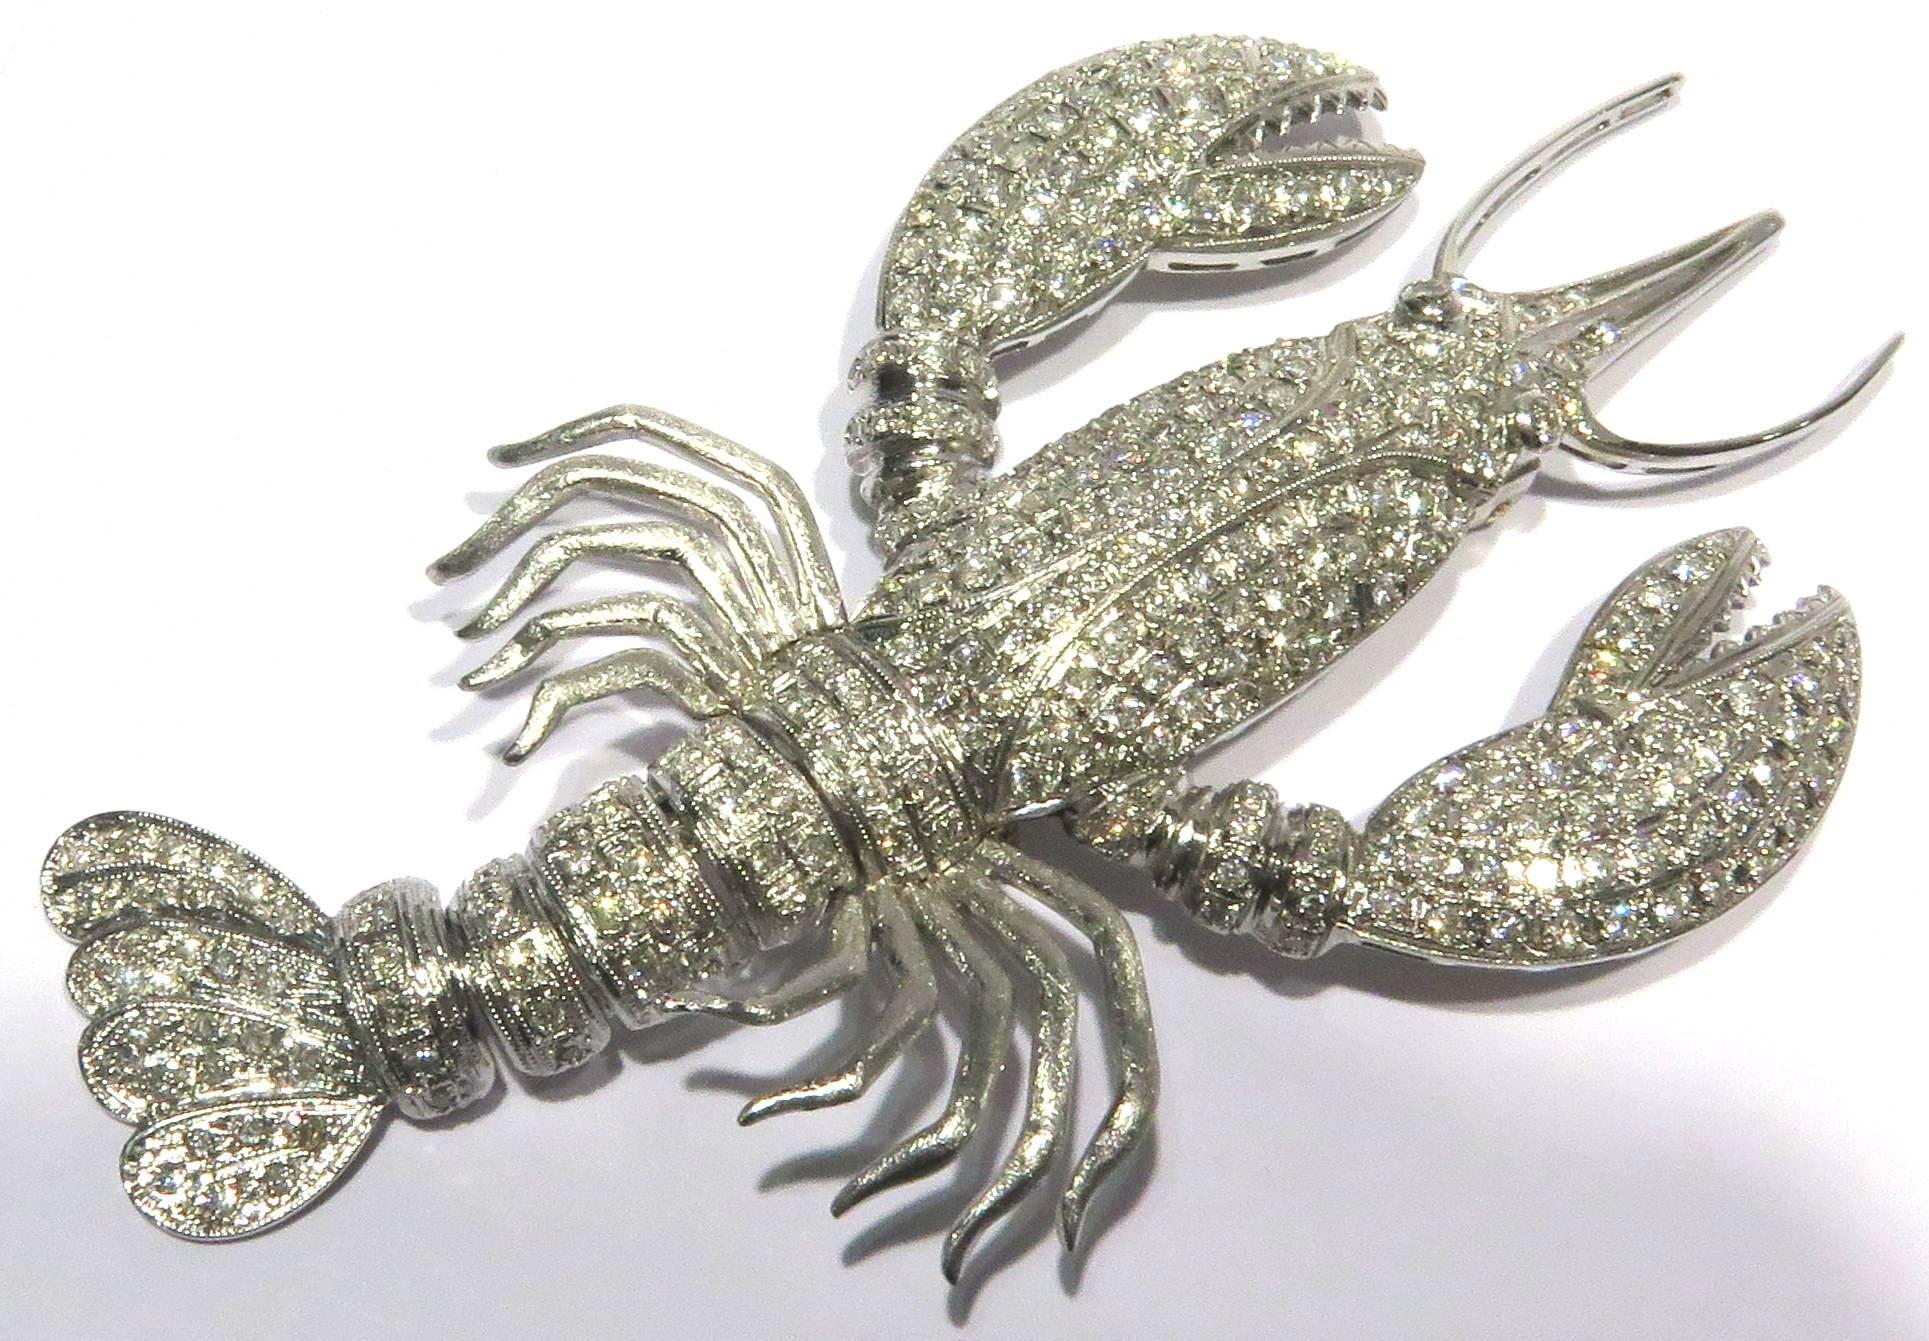 This mega adorable 14k white gold diamond lobster pin looks good enough to eat! His tail is flexible and moves in a very realistic natural way. His body has all pave' prong set diamonds. There are approximately 2.35 ct diamonds.
This lobster pin